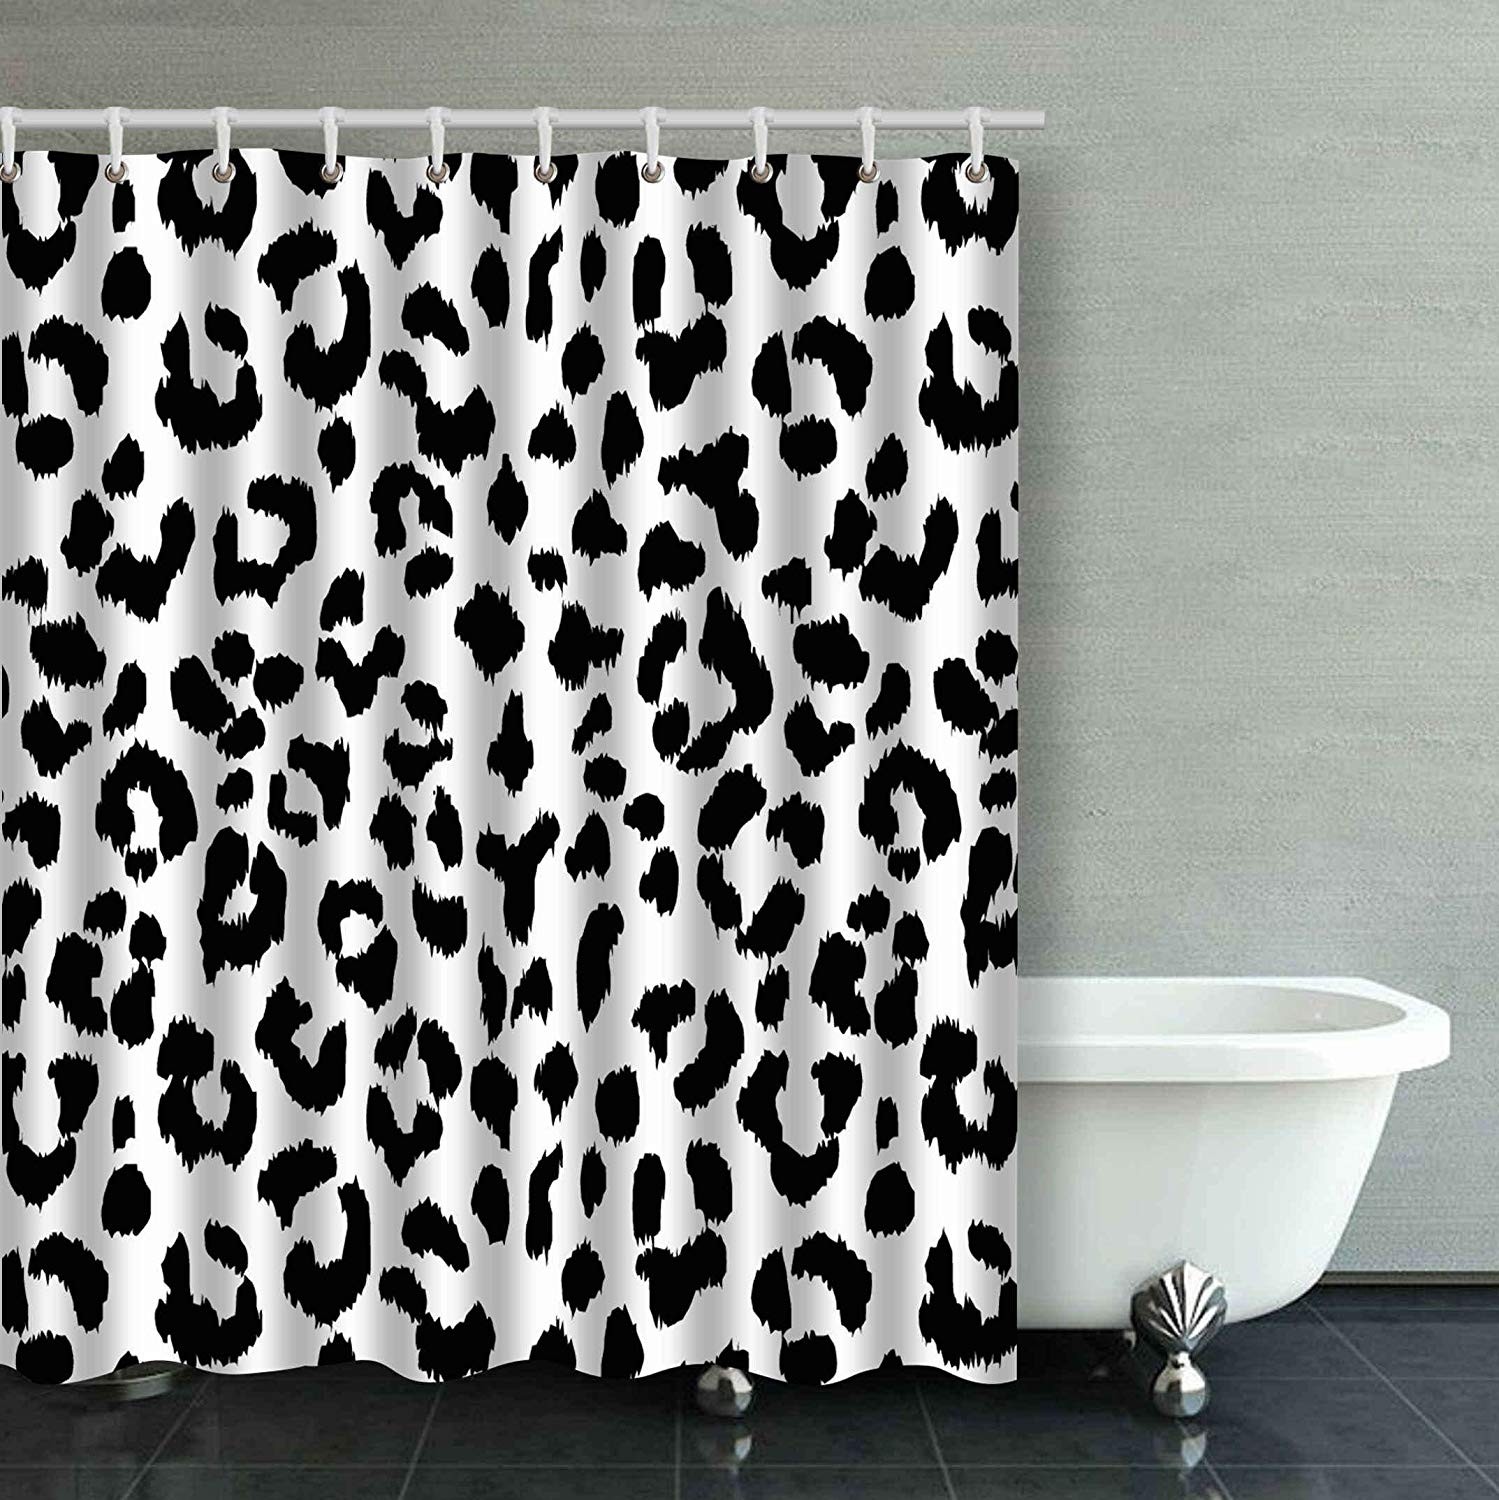 Wopop black and white leopard print animal accent bathroom